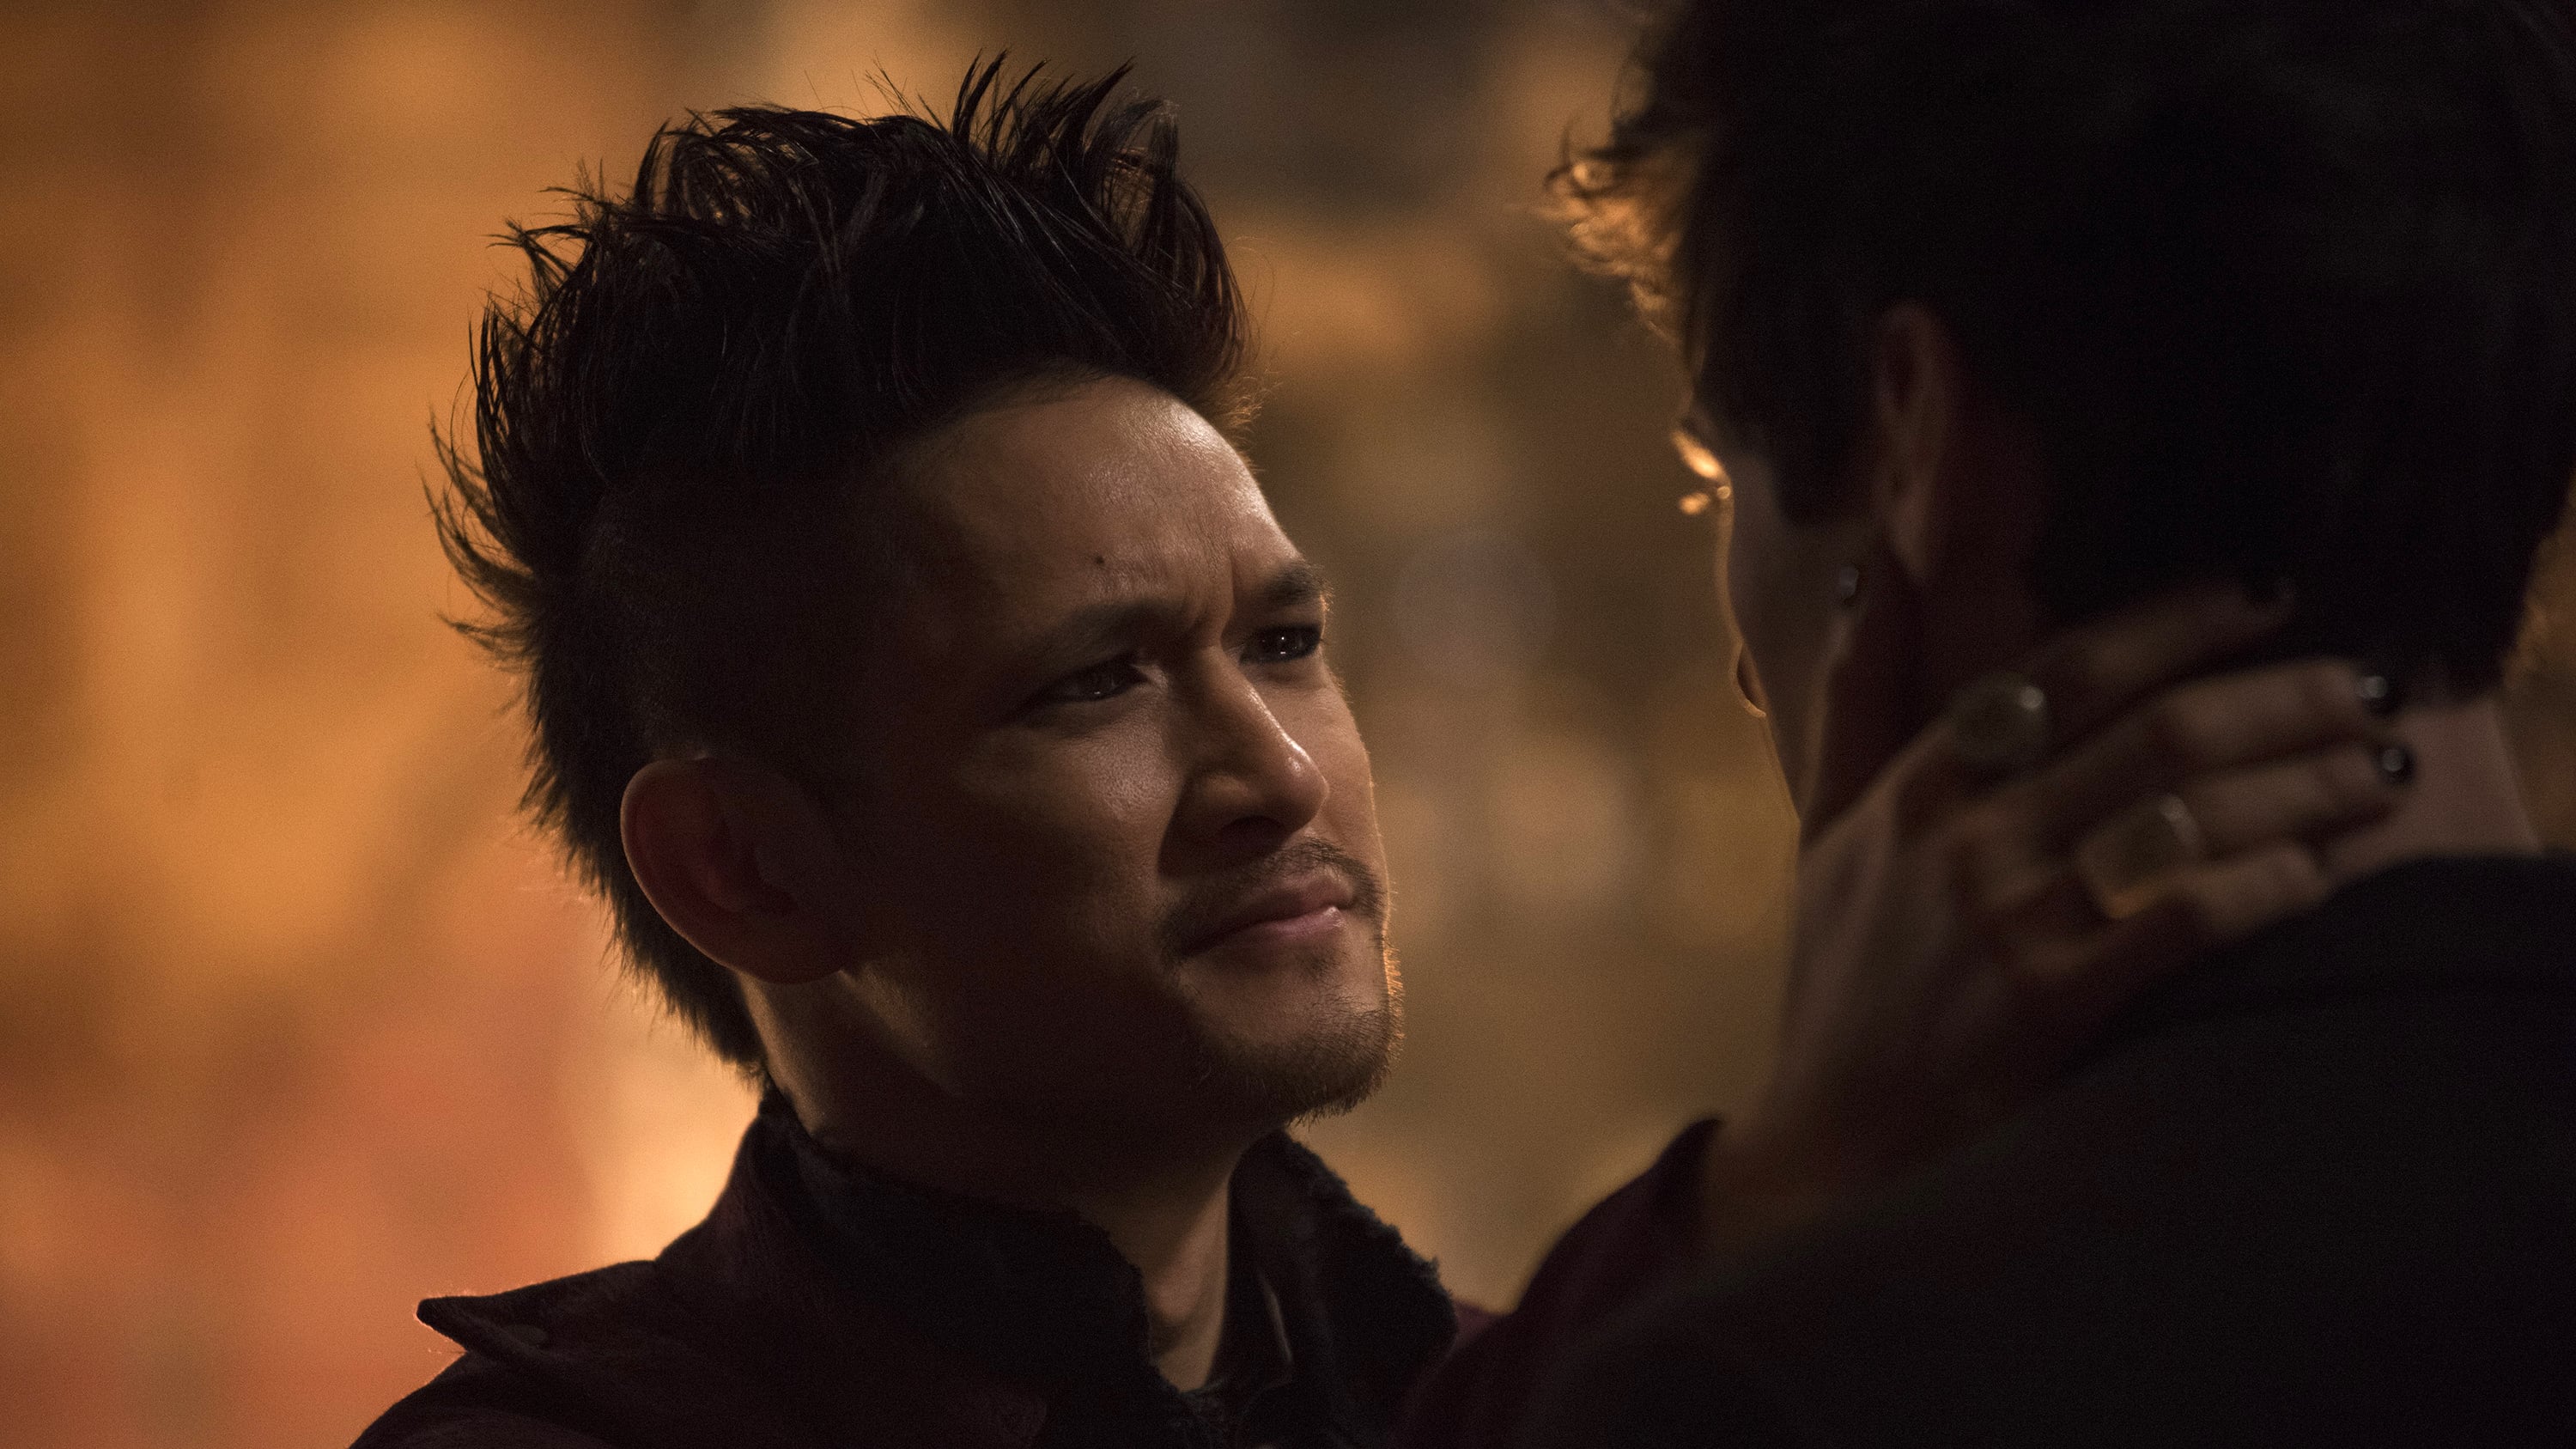 Shadowhunters Mid-Season Finale: “Love you to hell and back”